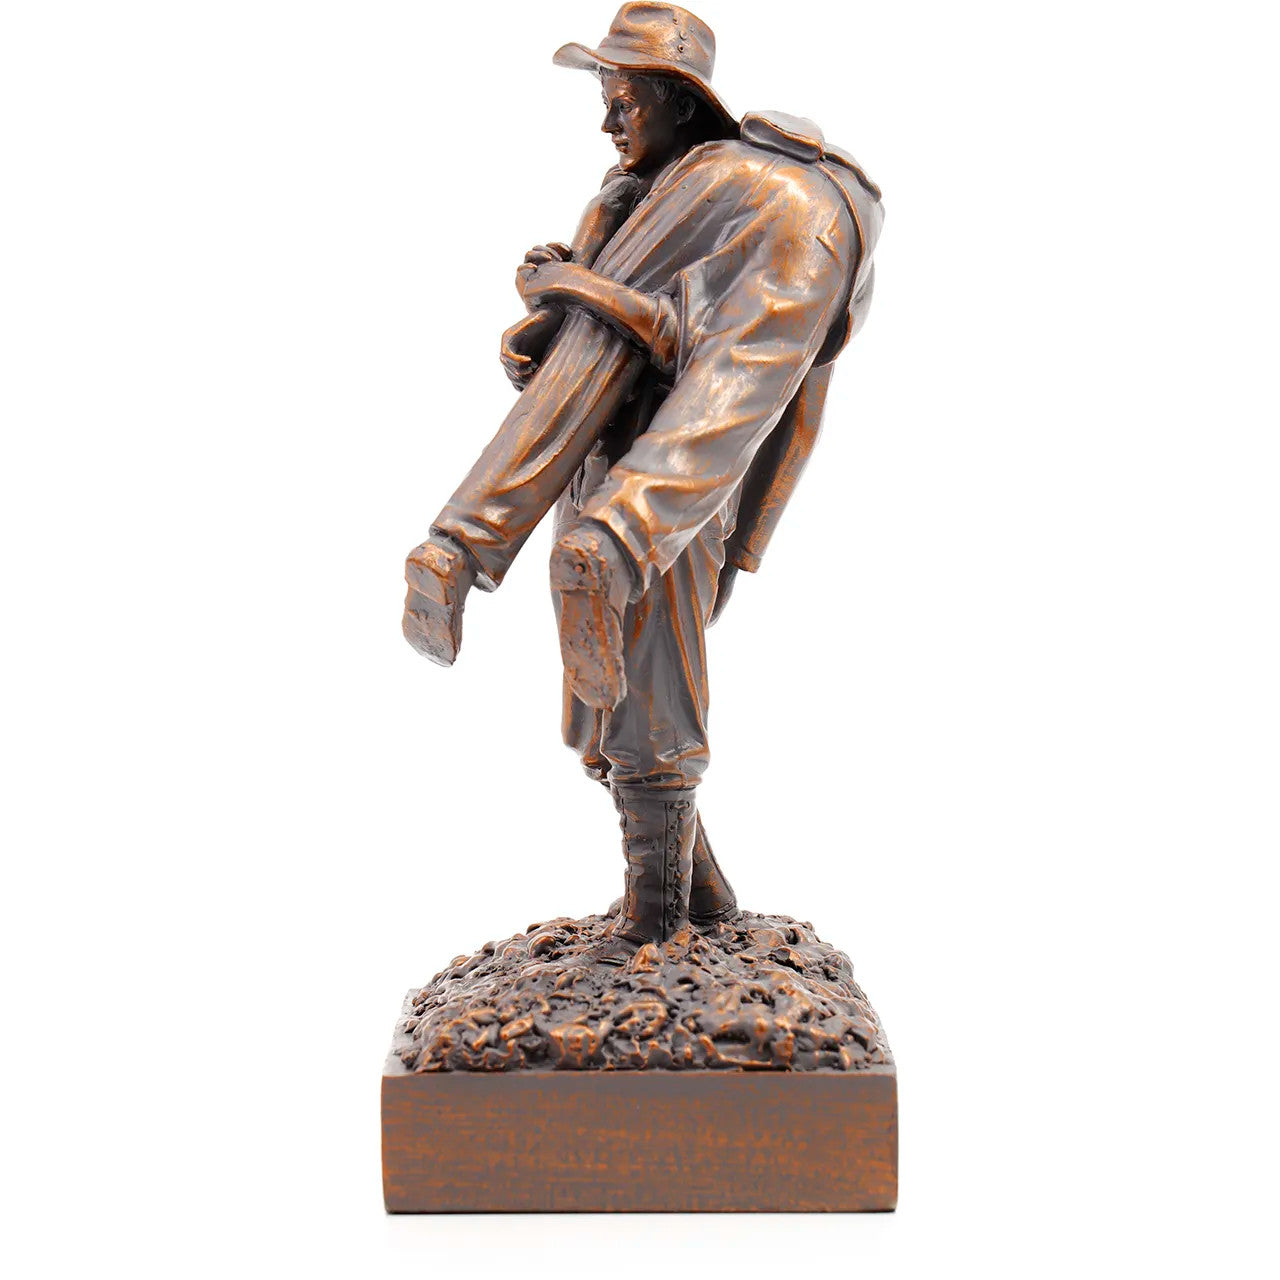 Introducing the Leslie Bull Allen Spirit of Mateship Figurine, a remarkable tribute to an extraordinary act of valor and camaraderie. Crafted with precision from cold cast bronze, this figurine immortalizes a defining moment in history. www.defenceqstore.com.au